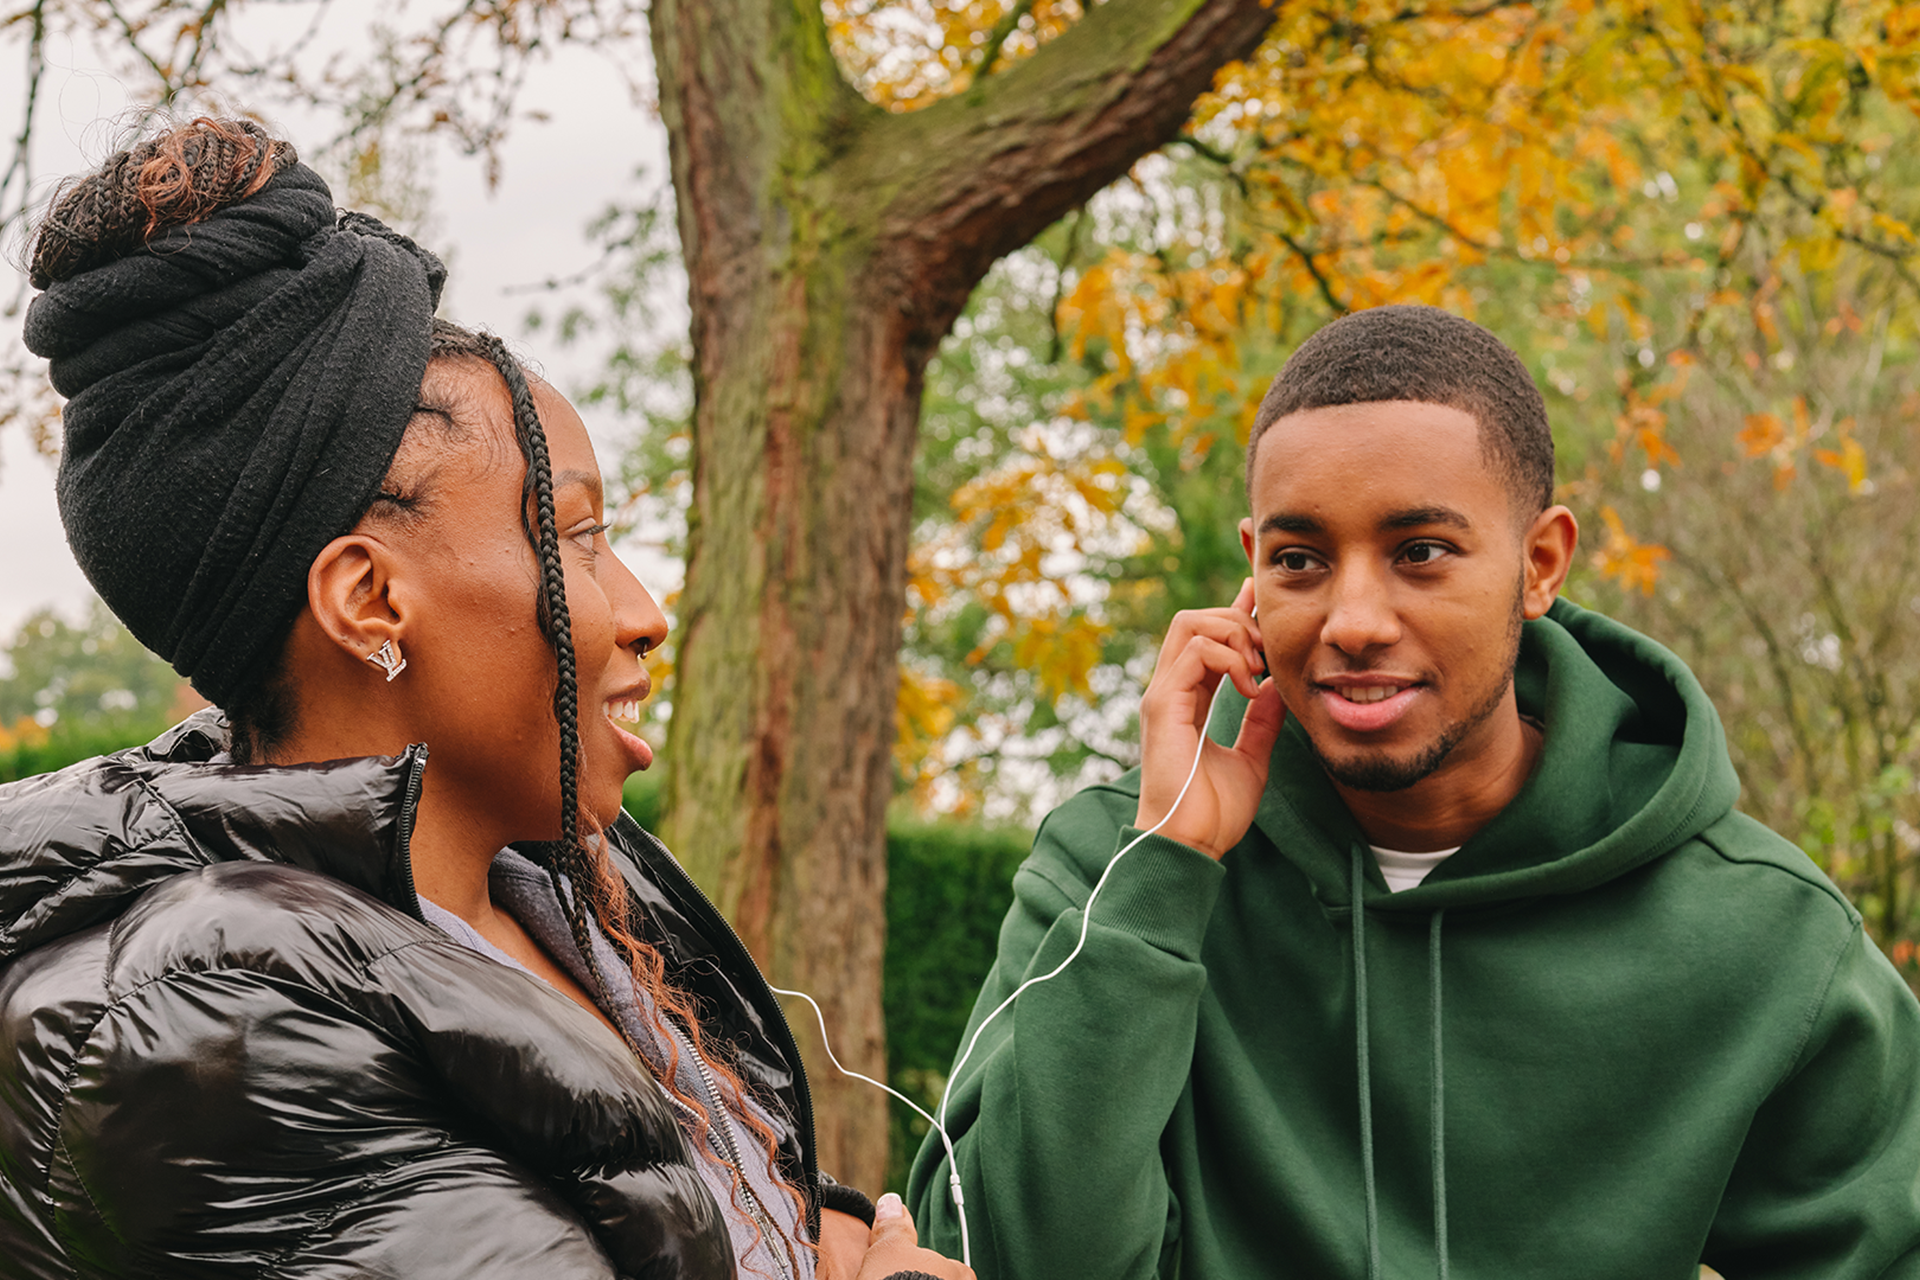 A Black young woman listening to music through headphones with a Black young man in the park.